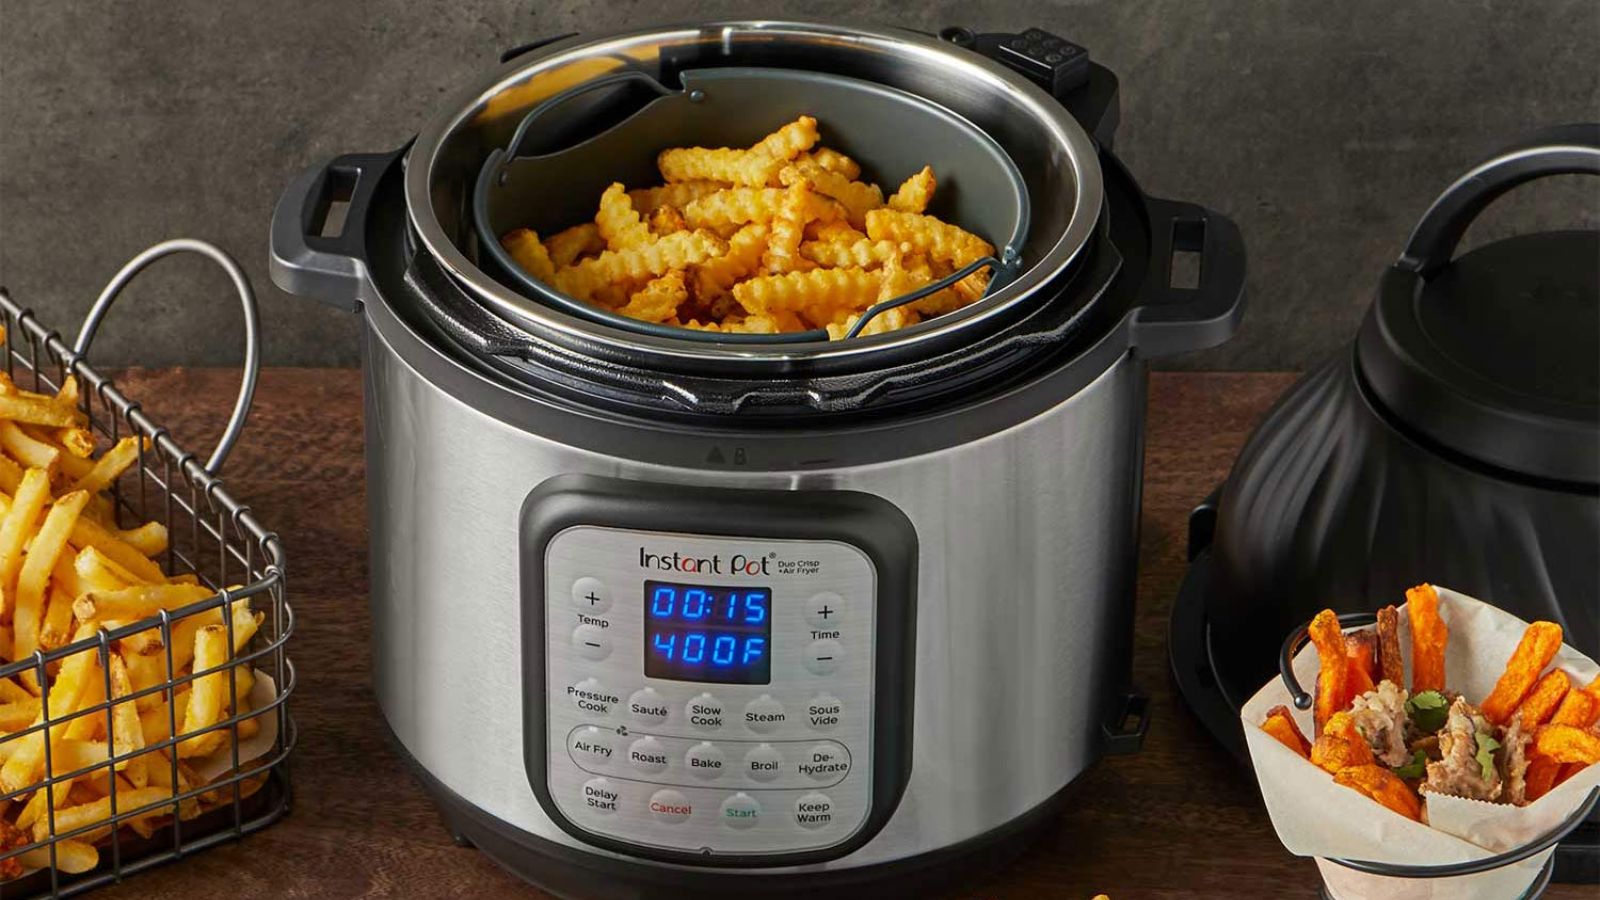 The beloved Instant Pot is one of the hottest Prime Day 2017 deals